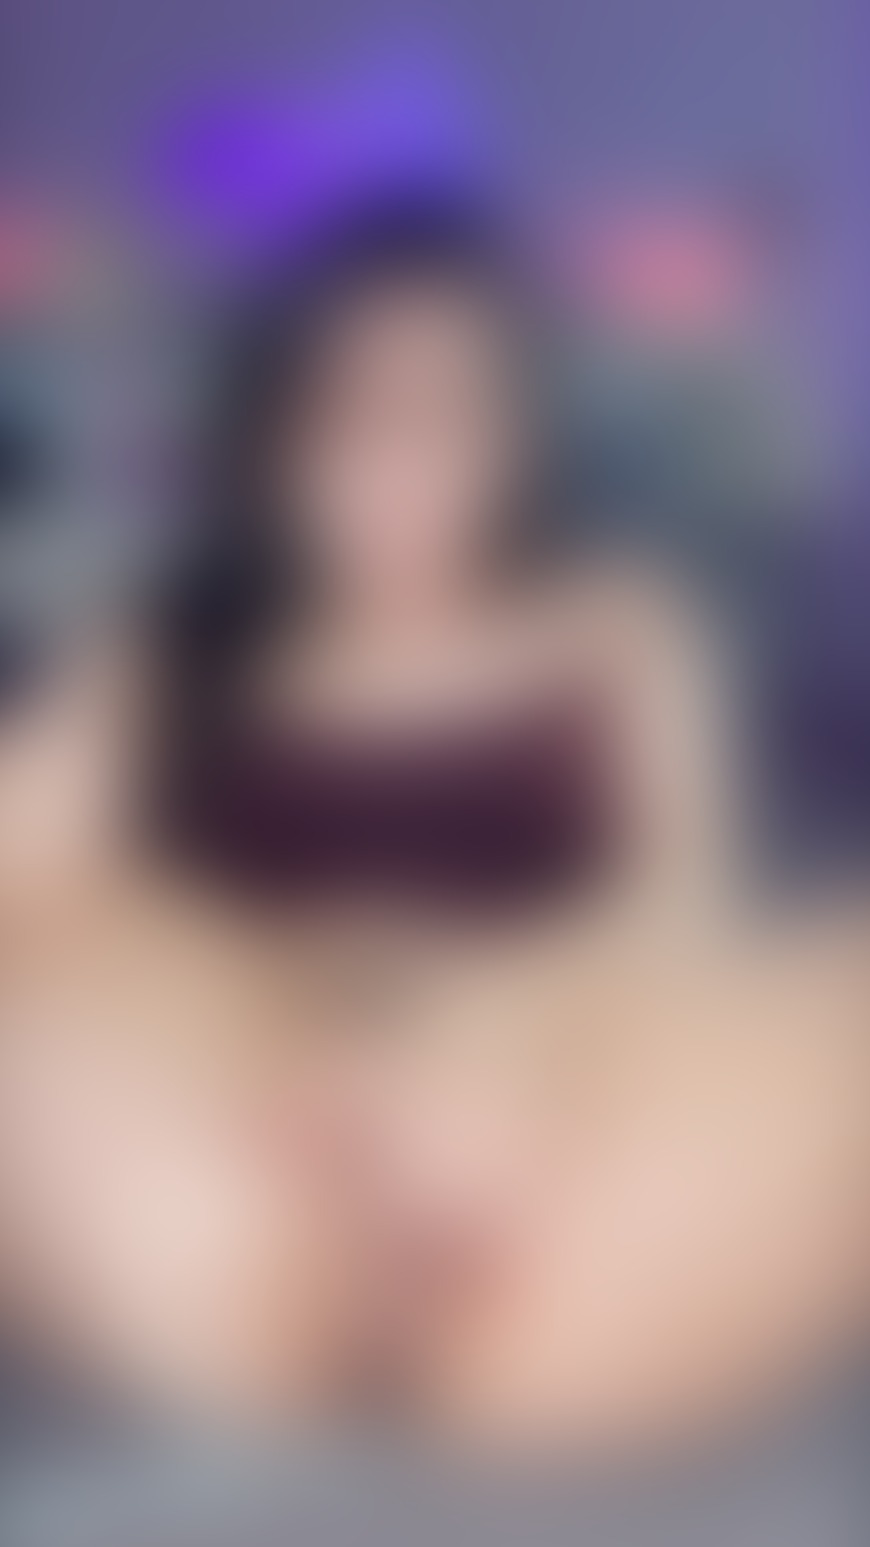 I Bet You Like This View 🤩 - post hidden image